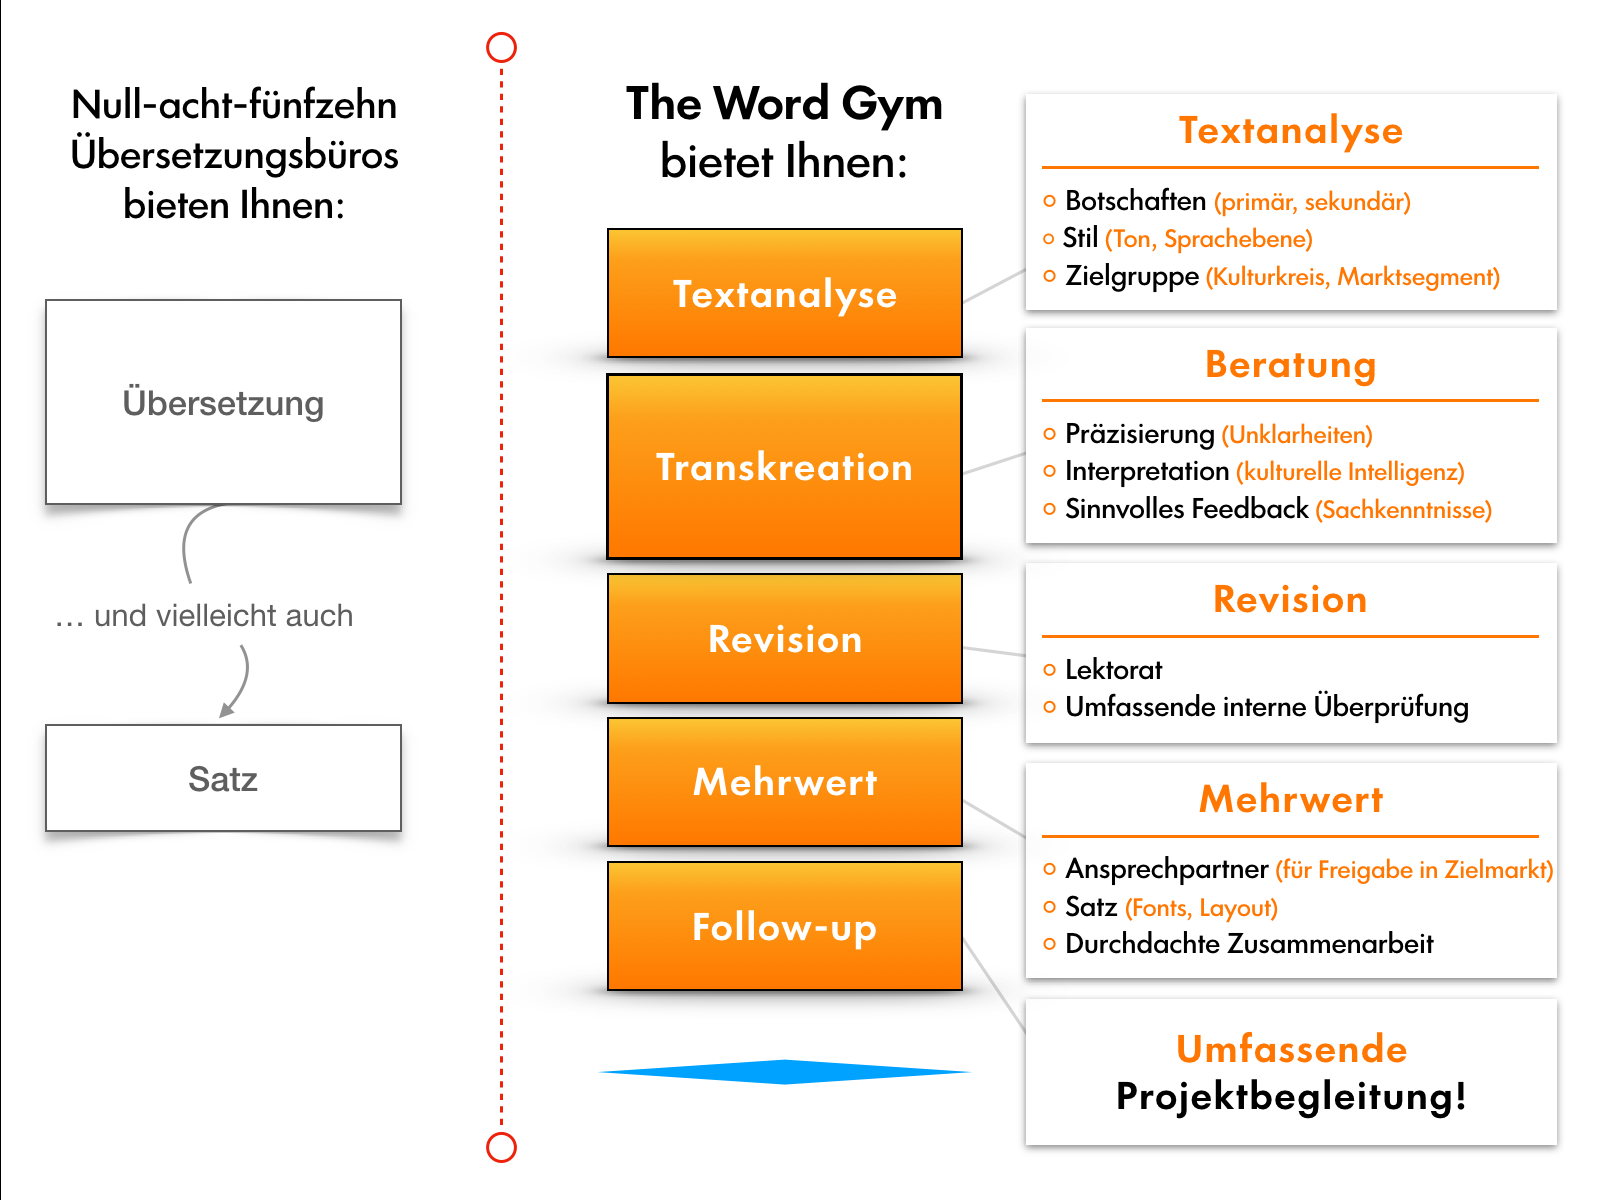 The Word Gym difference